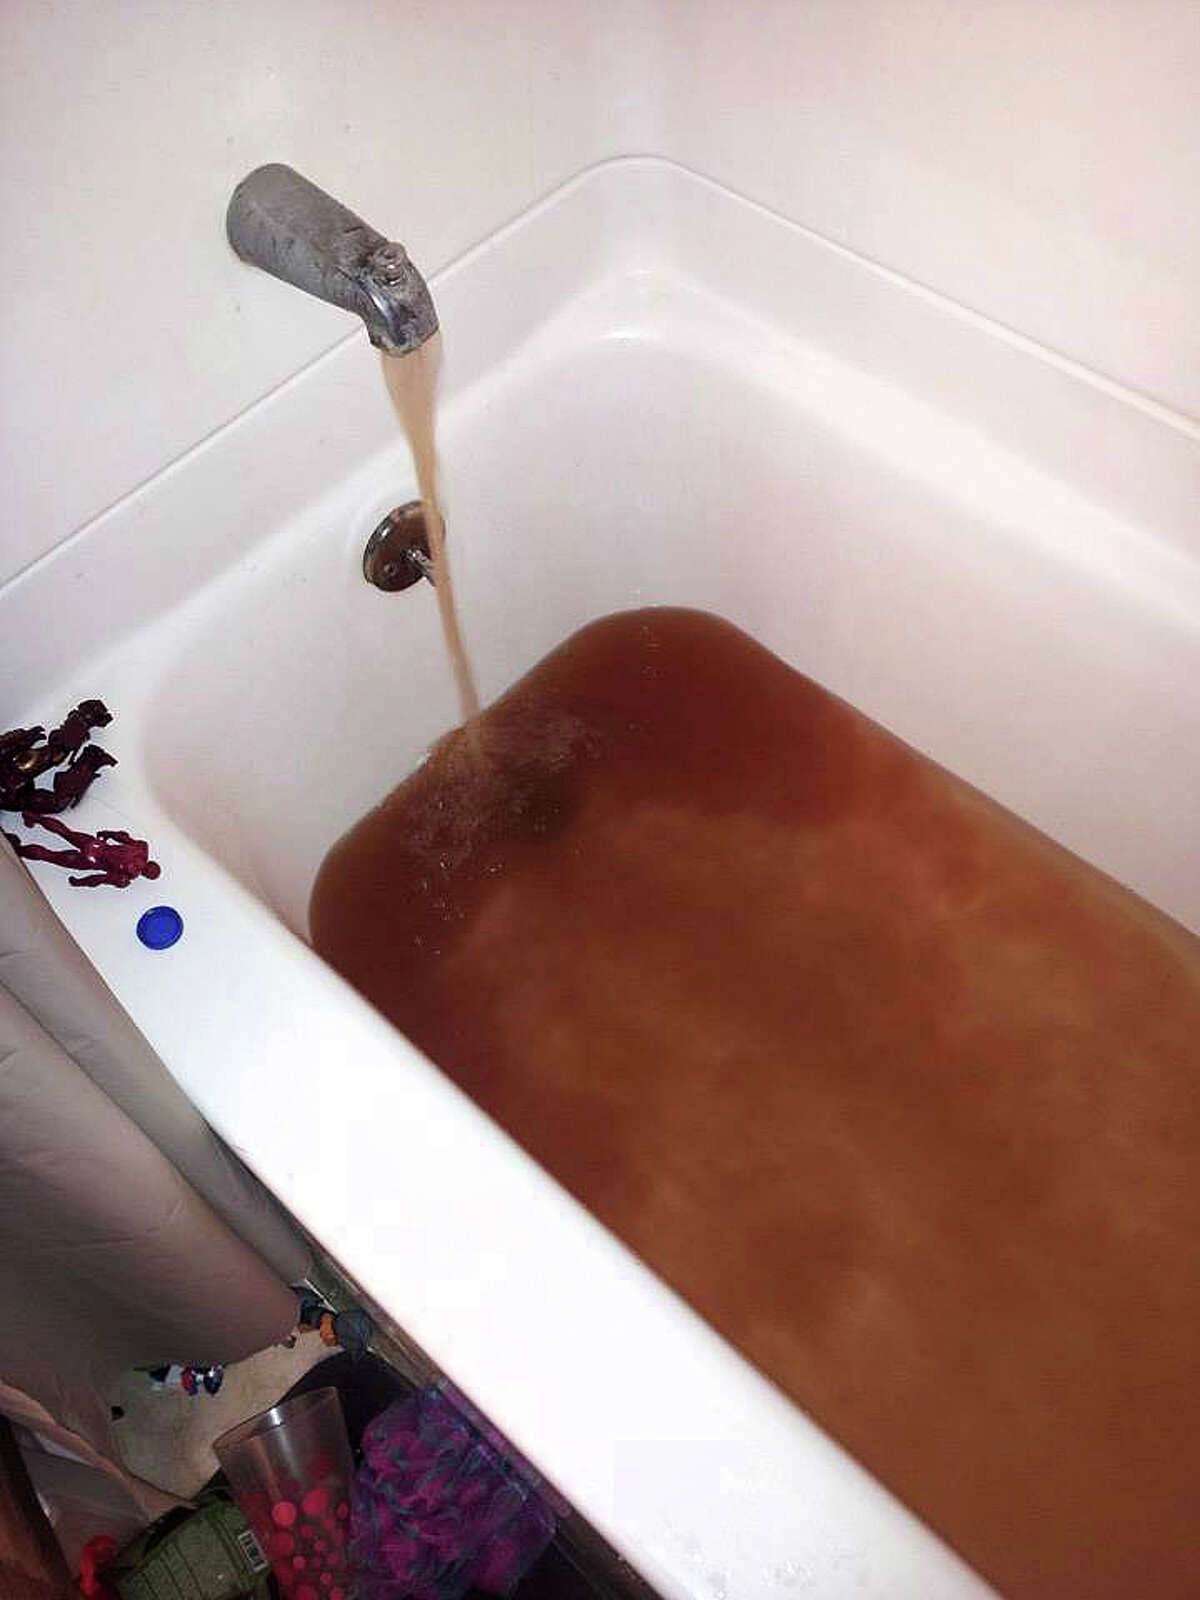 JANUARY 2014: Bridge City officials report the accidental overuse of three times the amount of the water-treatment chemical in Napco, escalating reports of rust-colored water.